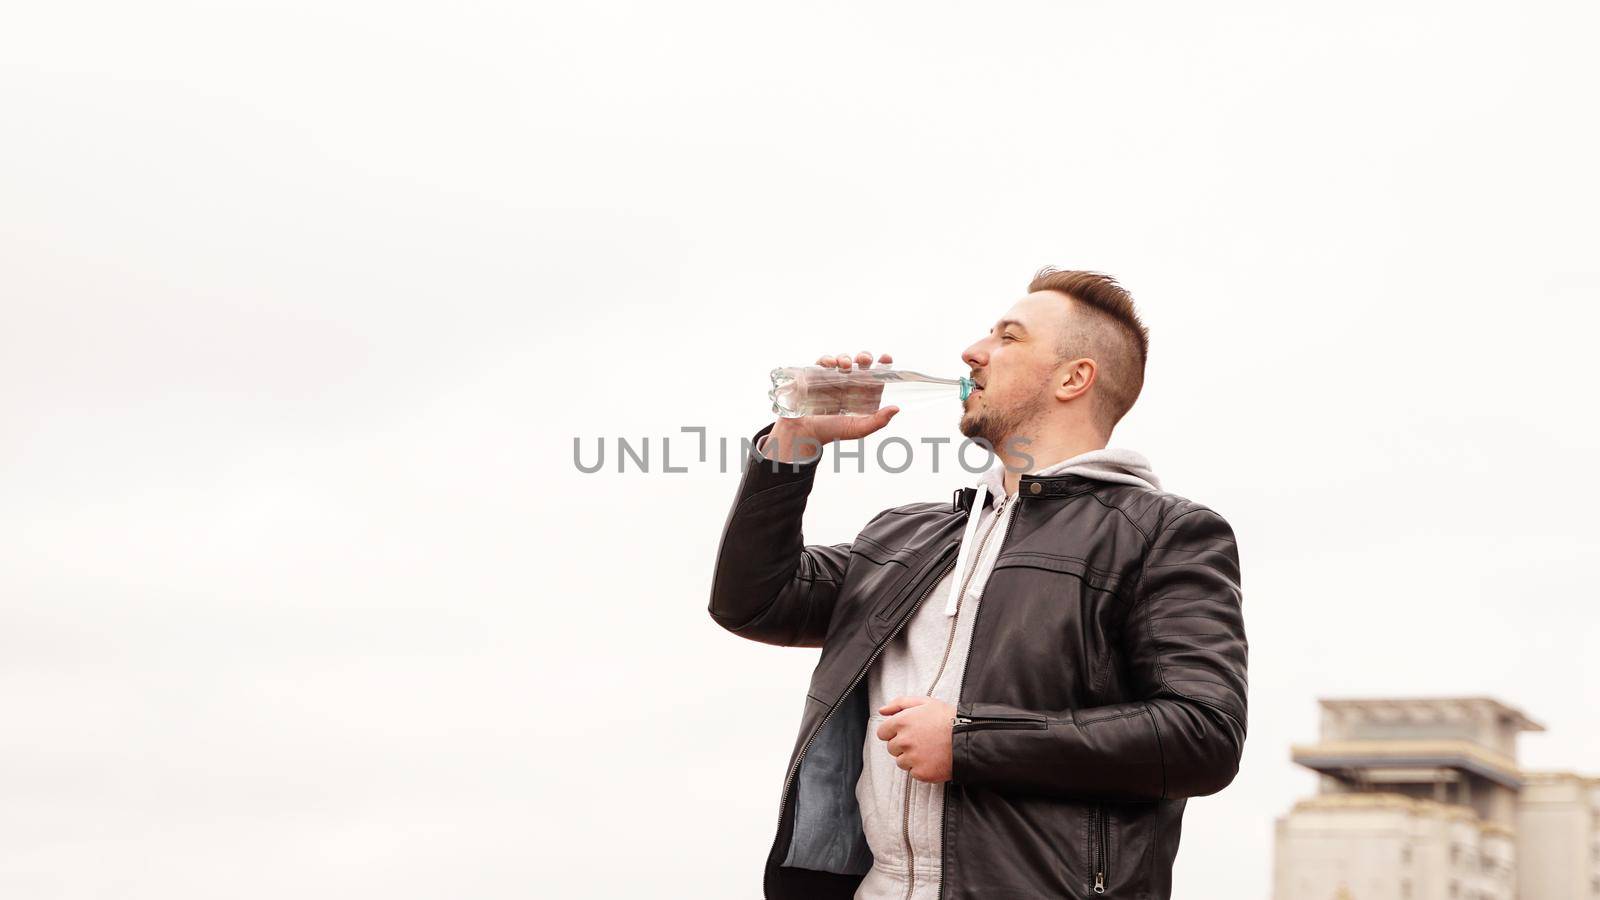 A man in a leather jacket drinks water from a bottle against the background of the sky